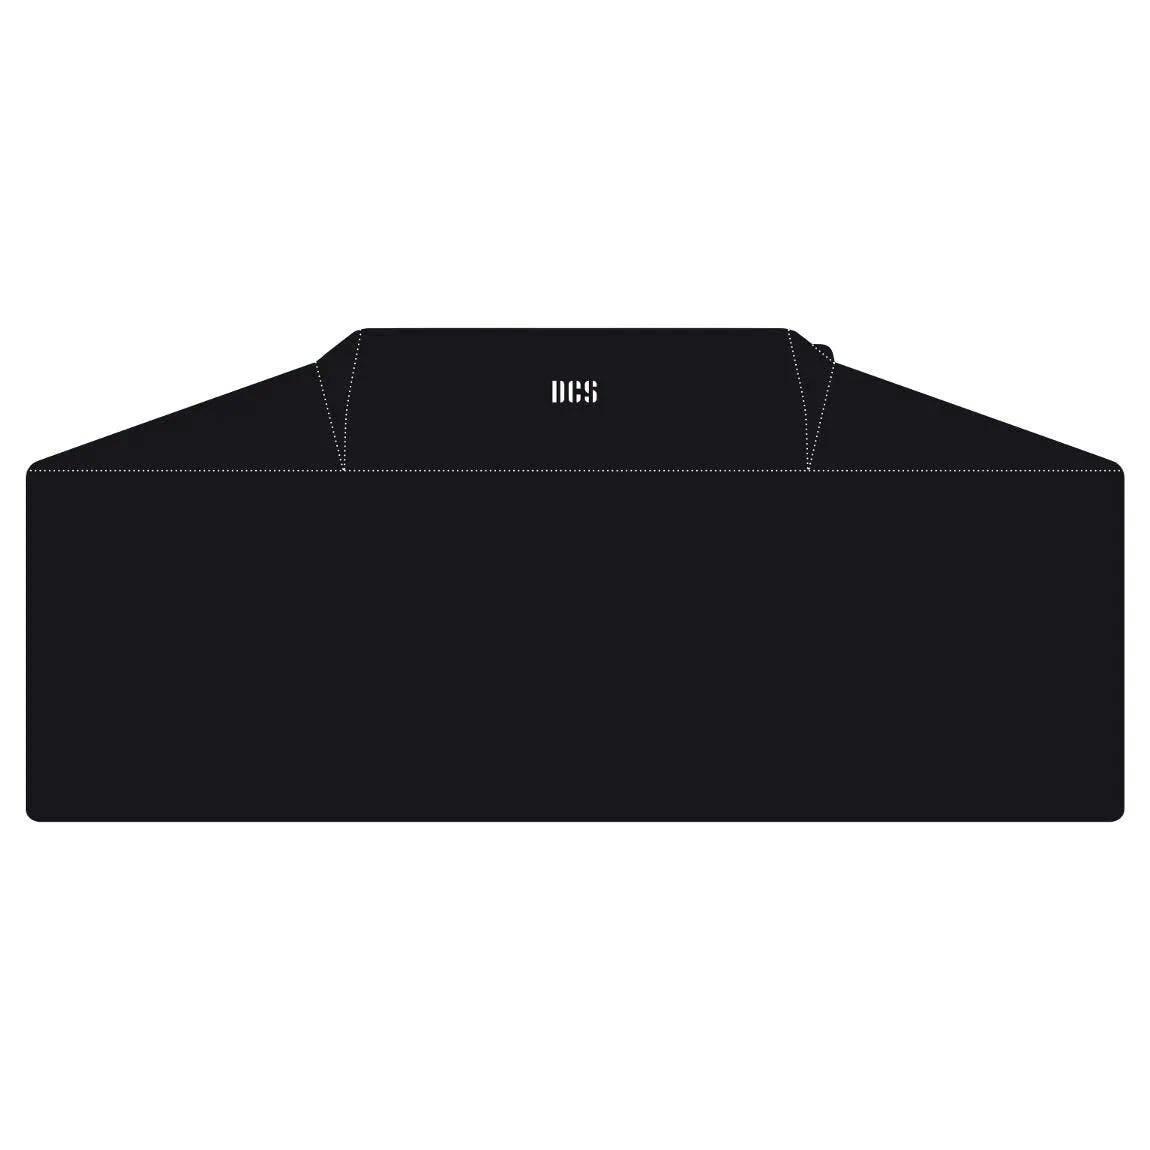 DCS Grill Cover For Gas Grill